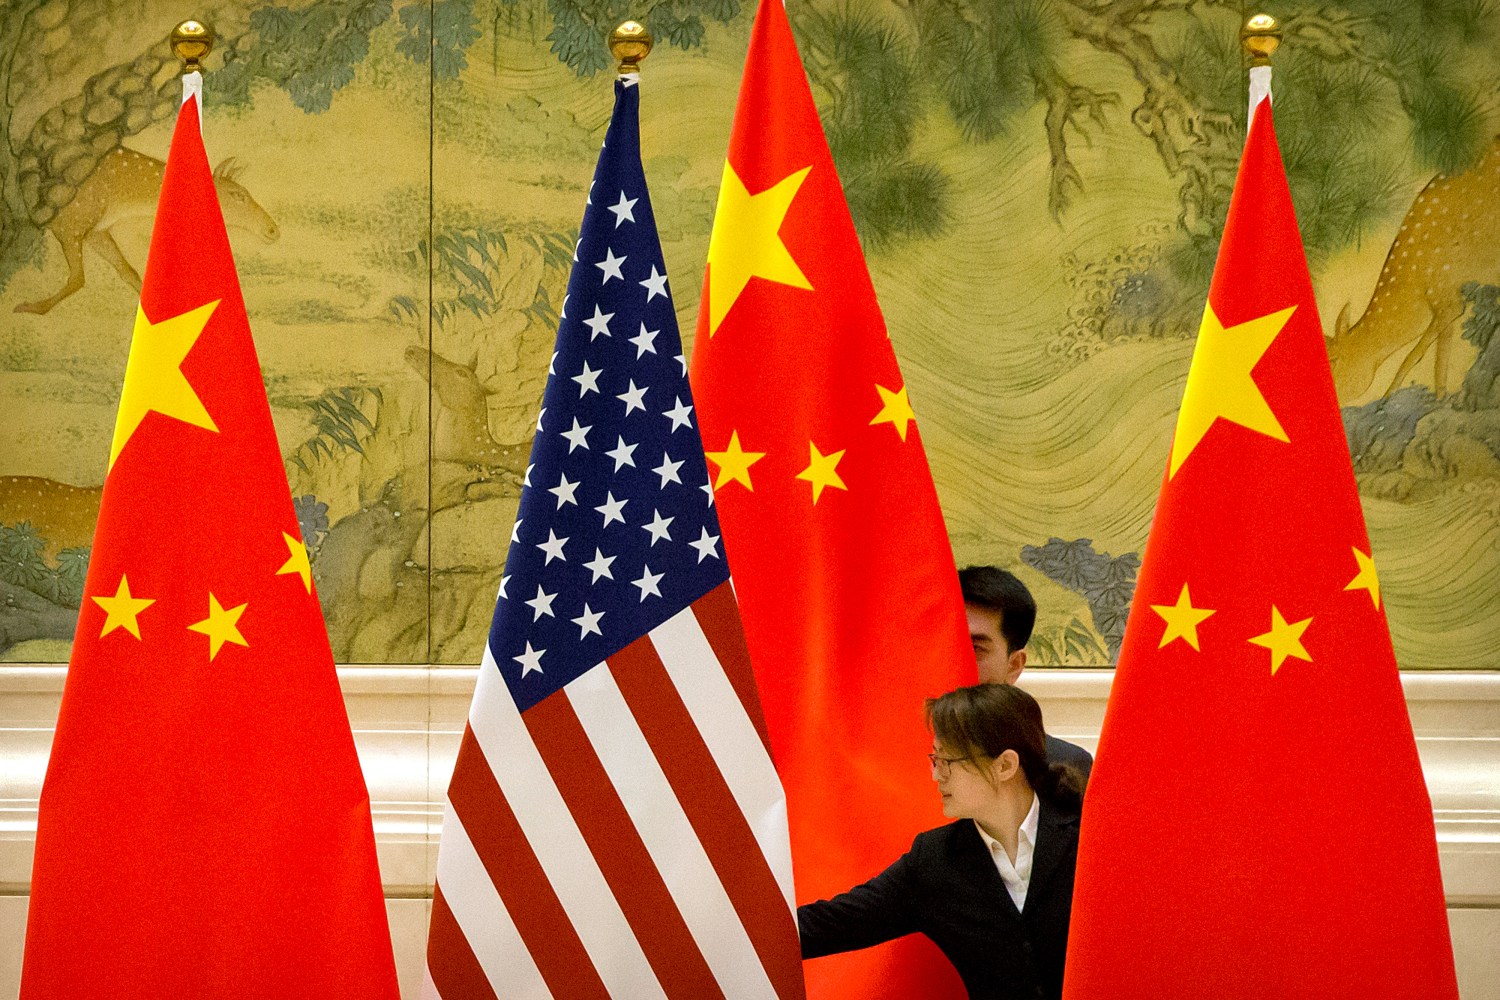 Chinese staffers adjust U.S. and Chinese flags before the opening session of trade negotiations between U.S. and Chinese trade representatives at the Diaoyutai State Guesthouse in Beijing, Thursday, Feb. 14, 2019. Mark Schiefelbein/Pool via REUTERS - RC16D7D1C040